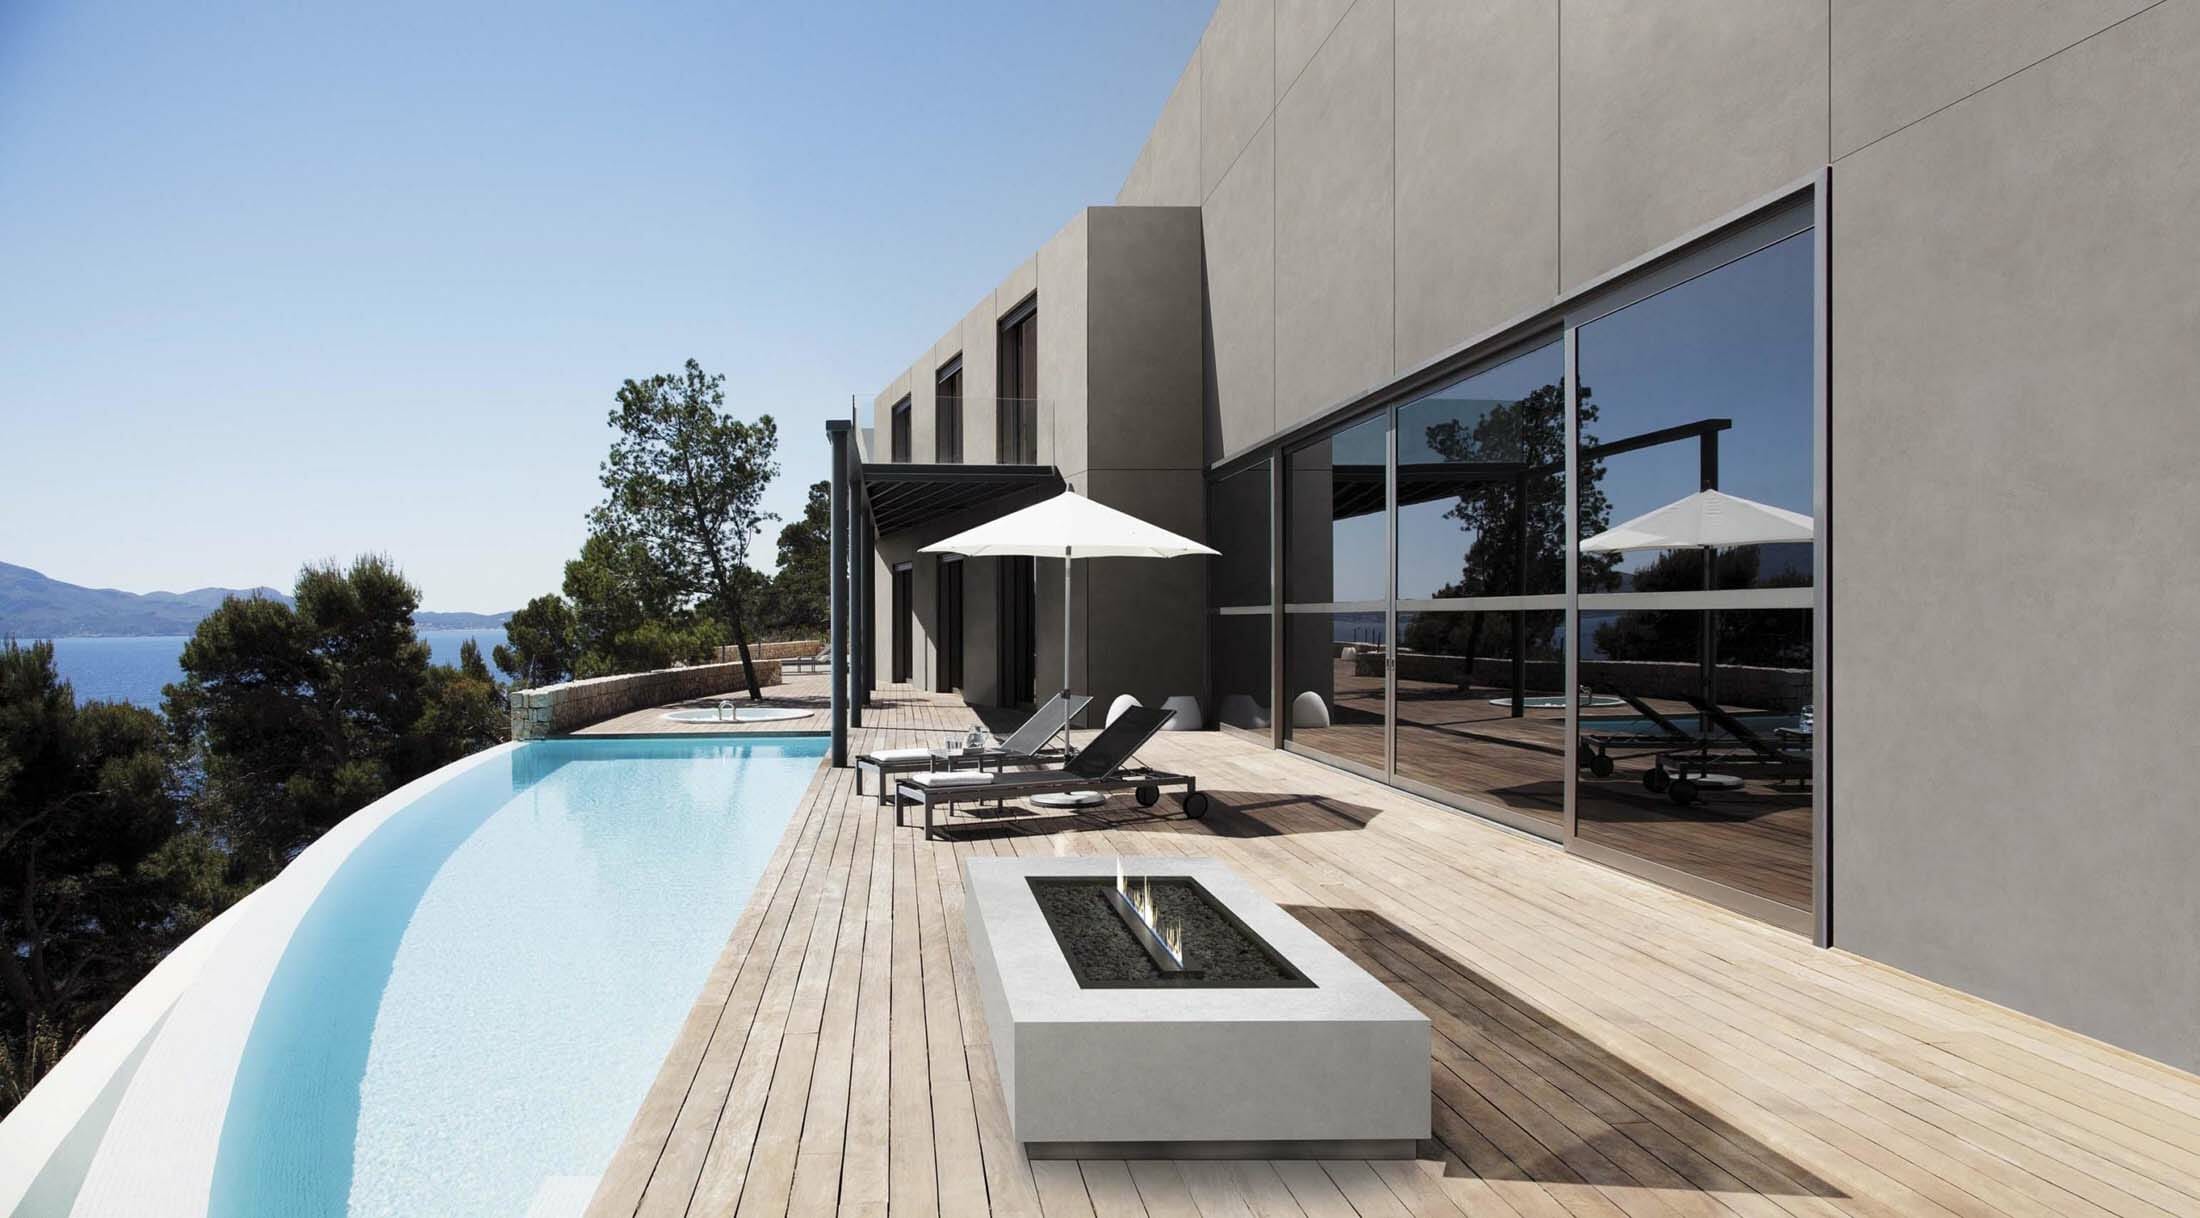 Lounge chairs and pool outside modern house